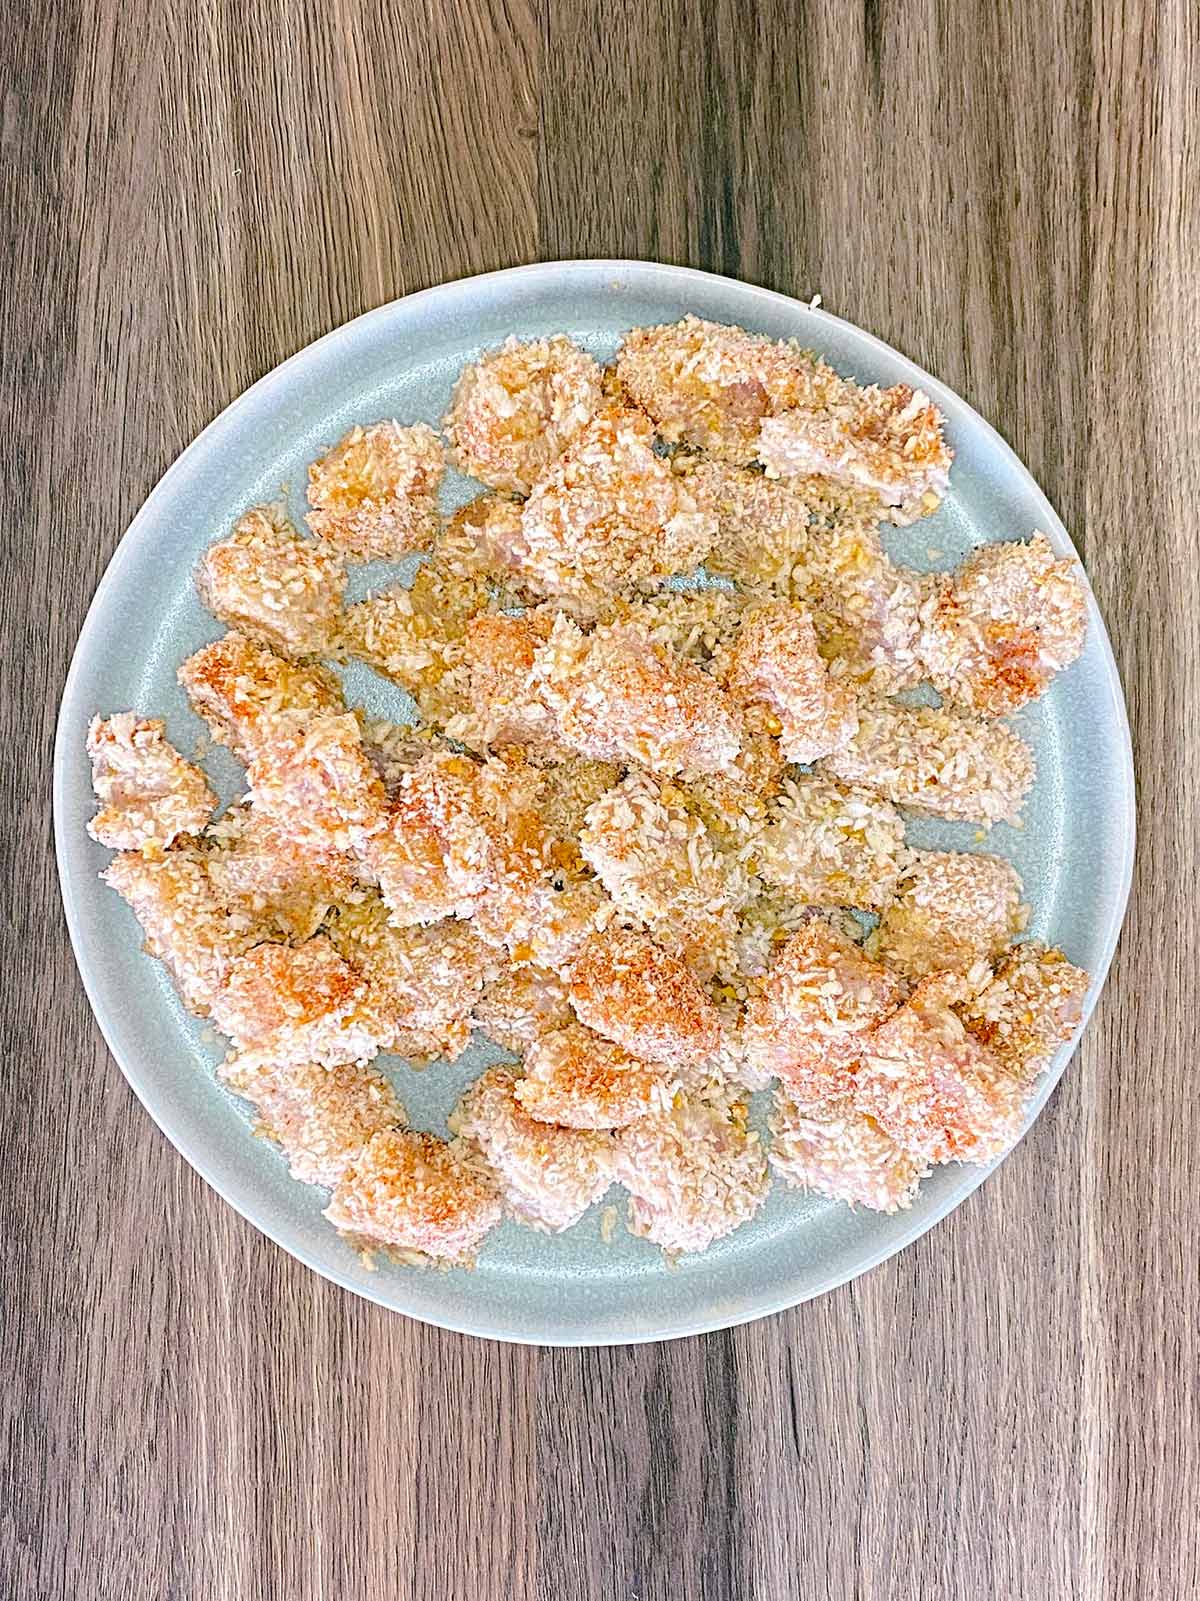 A plate of breaded, raw chicken cubes.